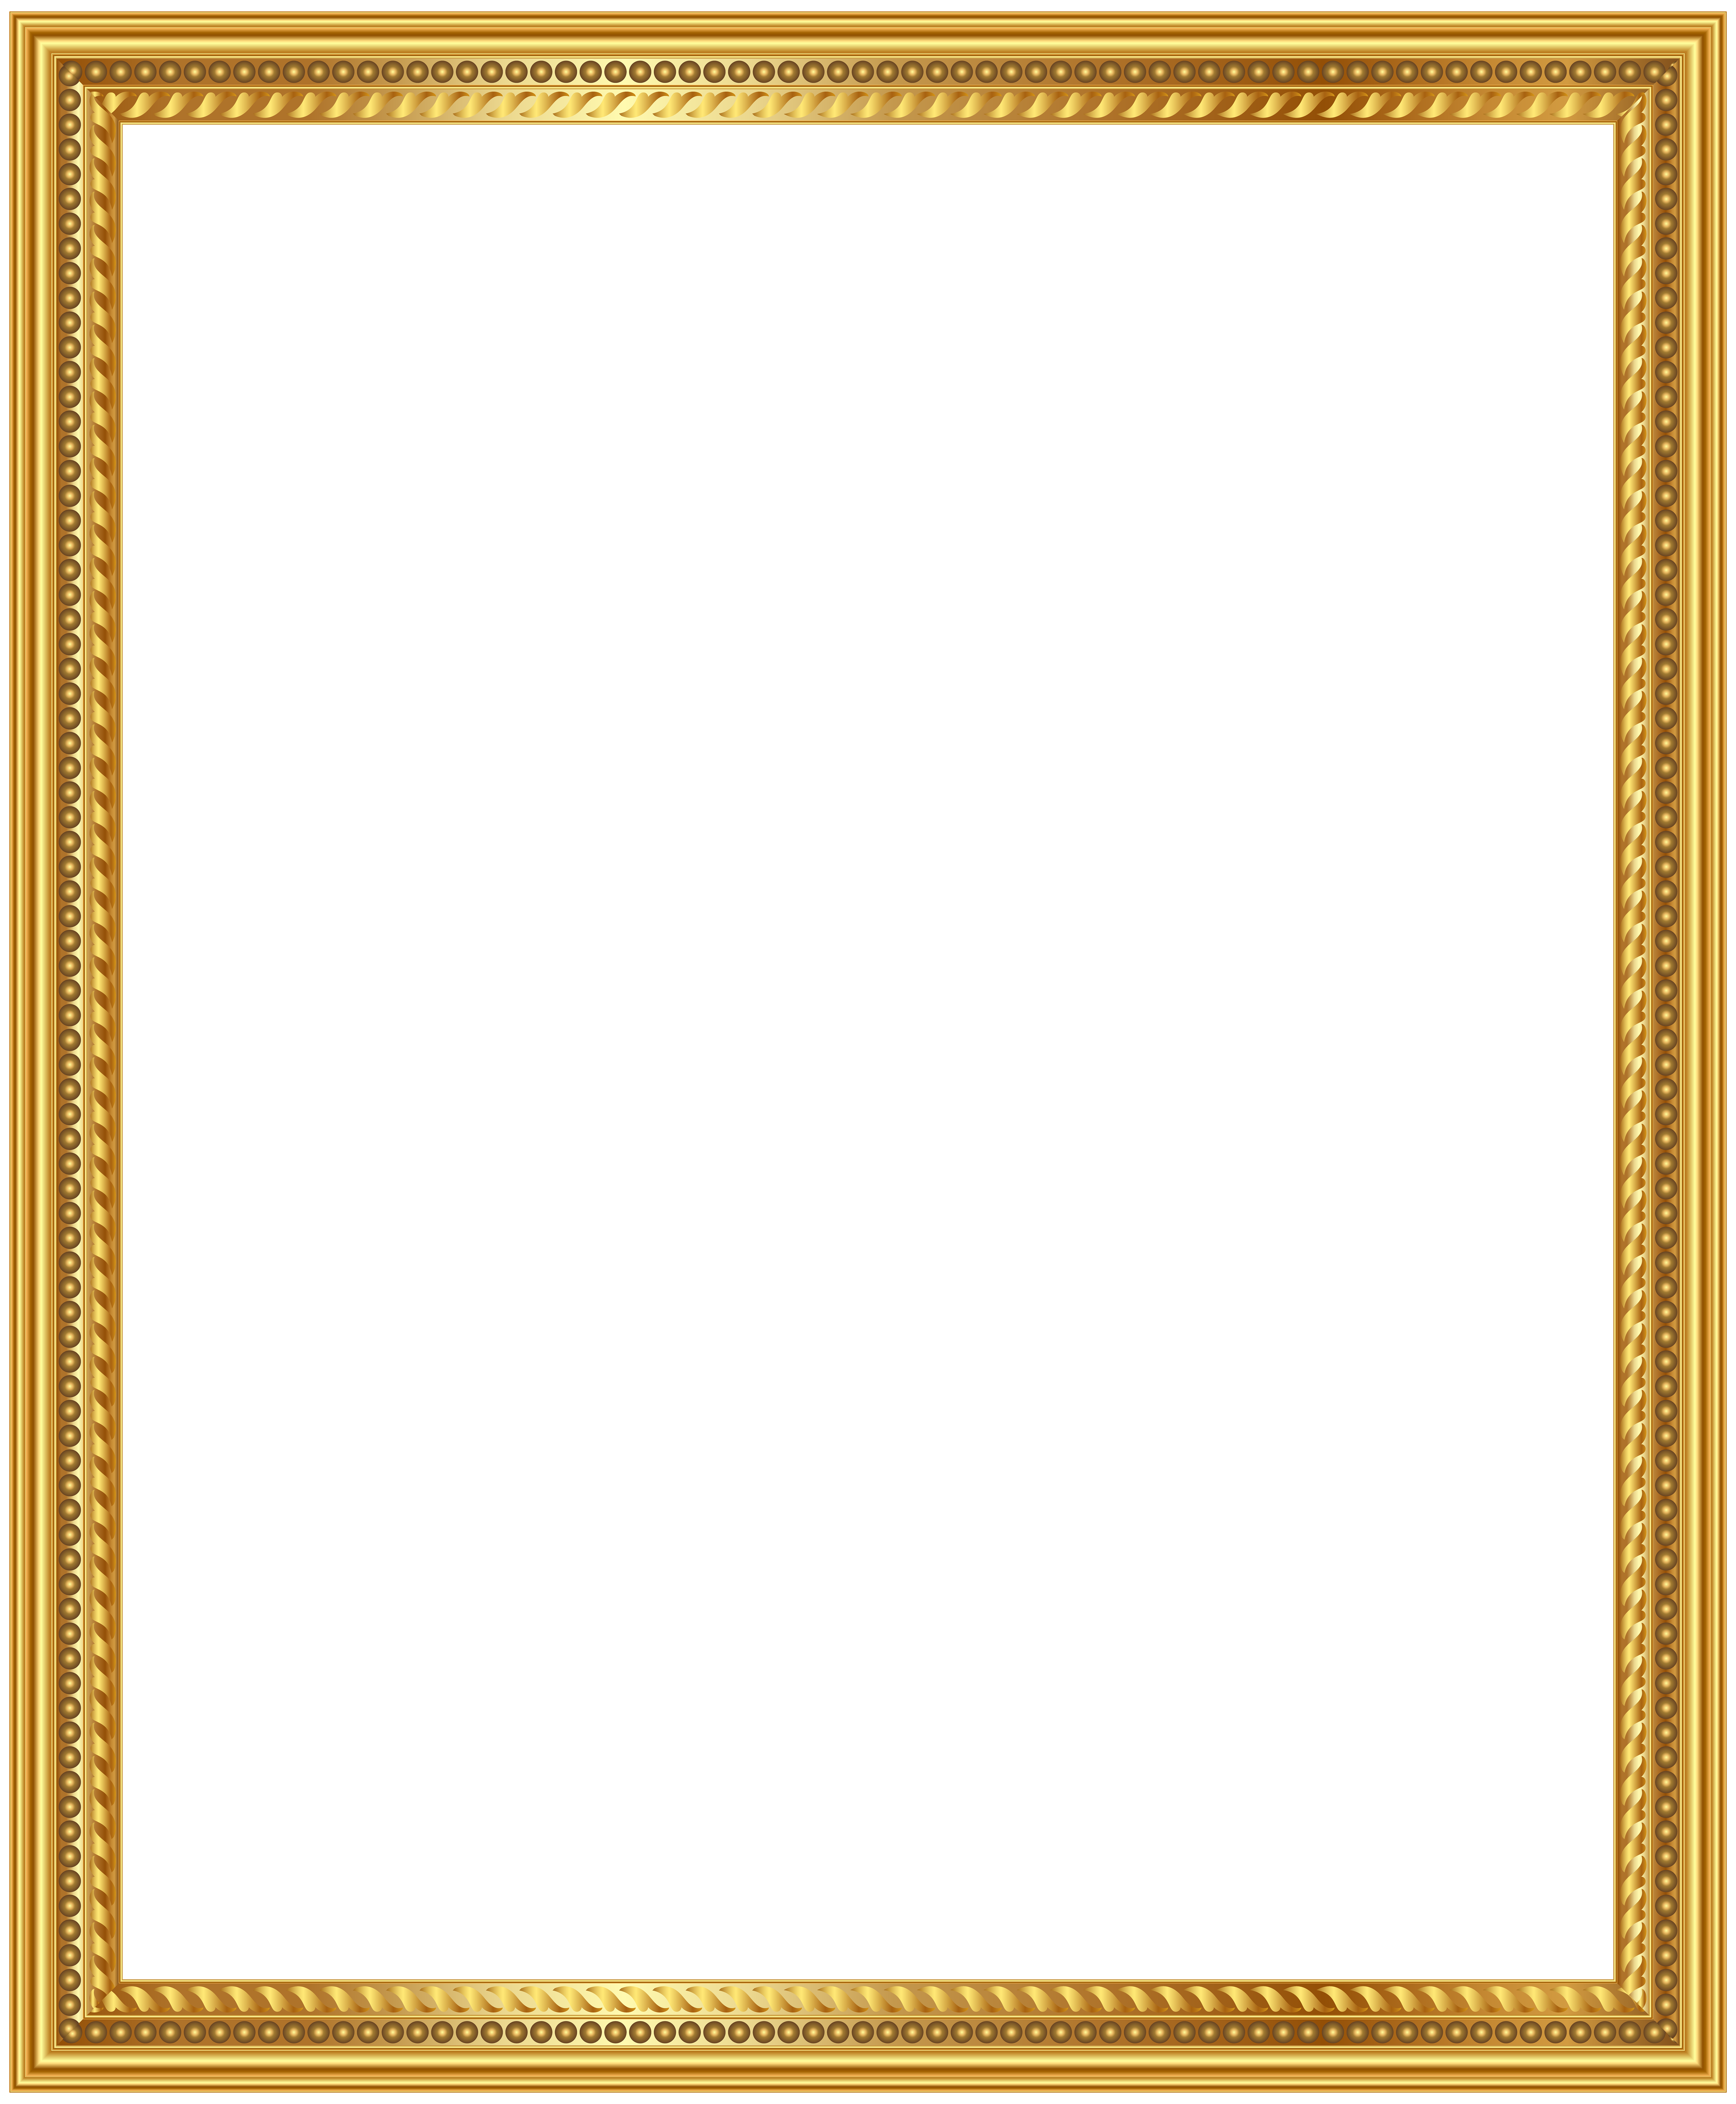 yellow frame png